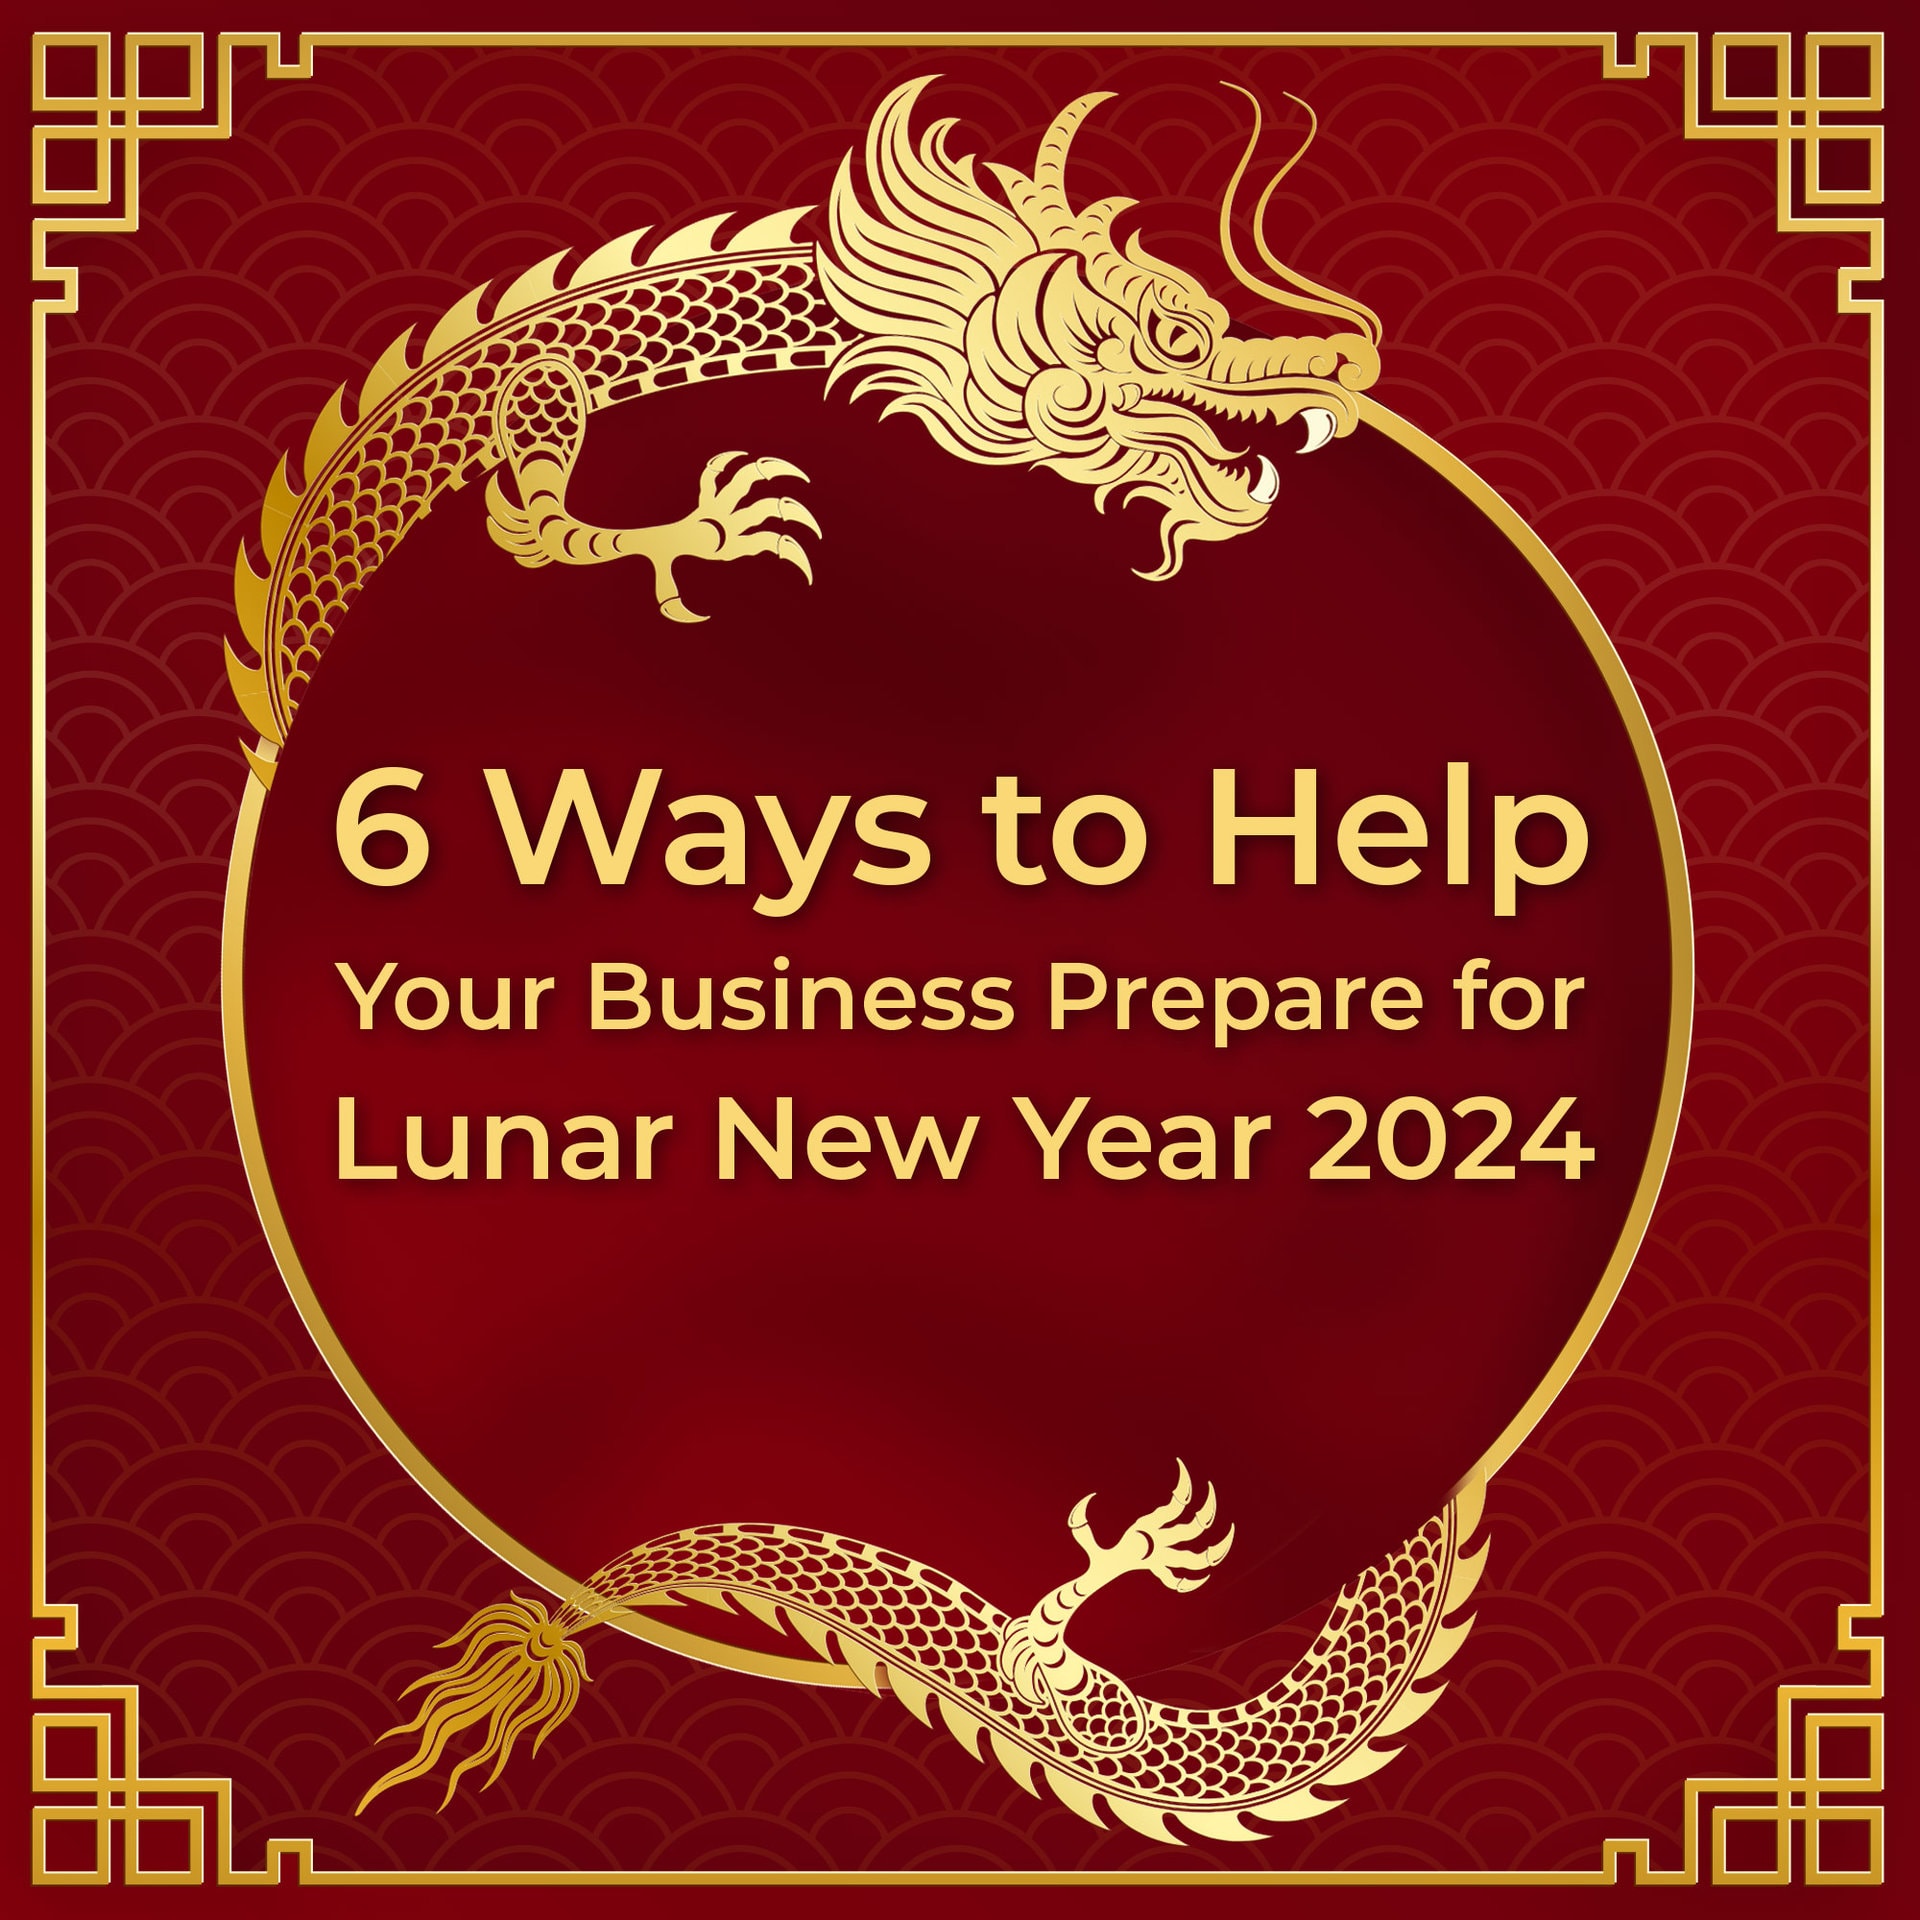 6 Ways to Help Your Business Prepare for Lunar New Year 2024